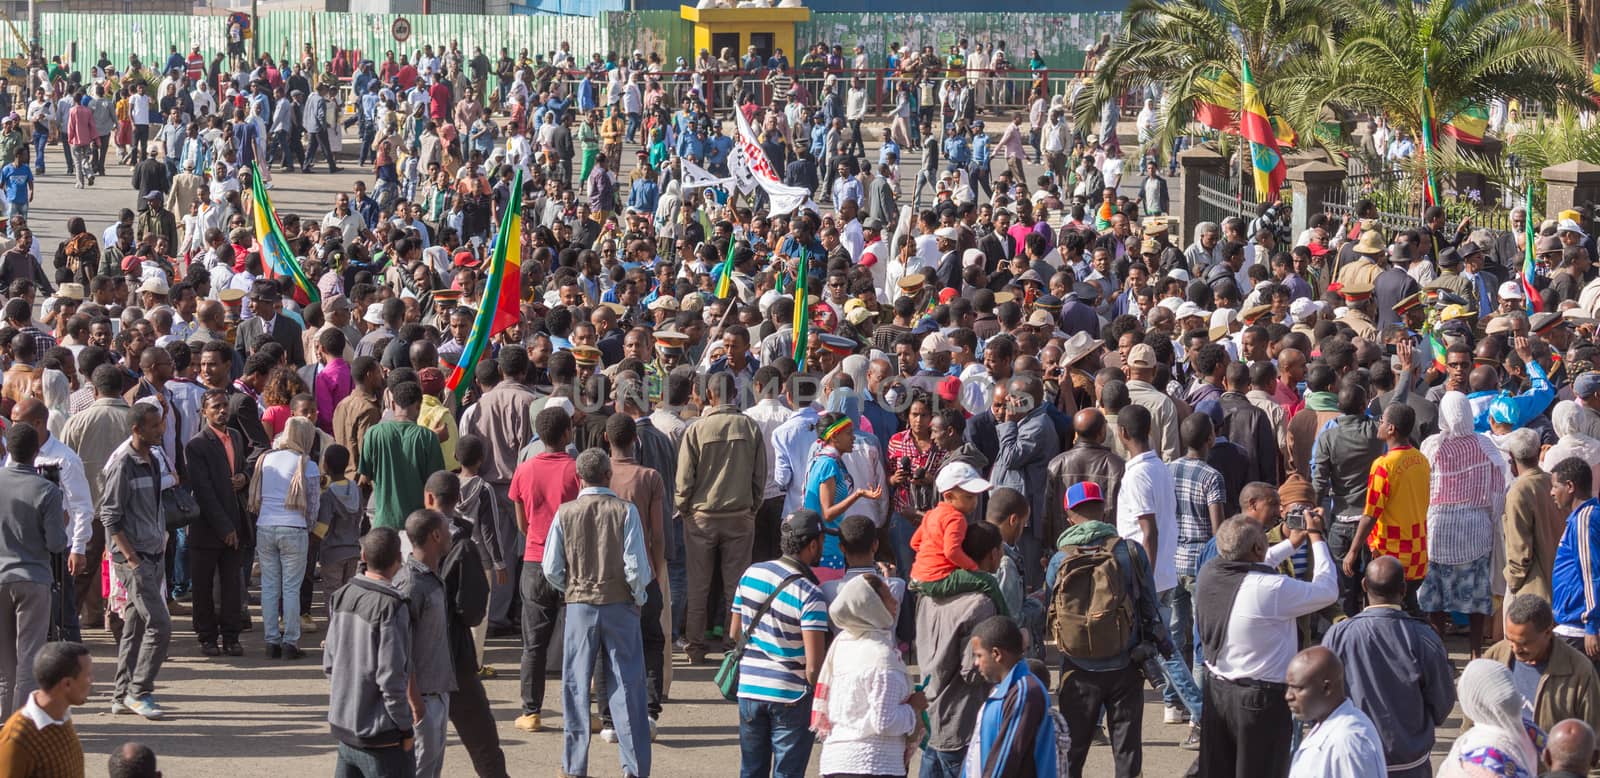 Addis Ababa - Sept 2: A large crowd gathers in front of Emperor Menelik's Monument to celebrate the 119th Anniversary of the Ethiopian Army's victory over the invading Italian forces in the 1896 battle of Adwa. September 2, 2015, Addis Ababa, Ethiopia.